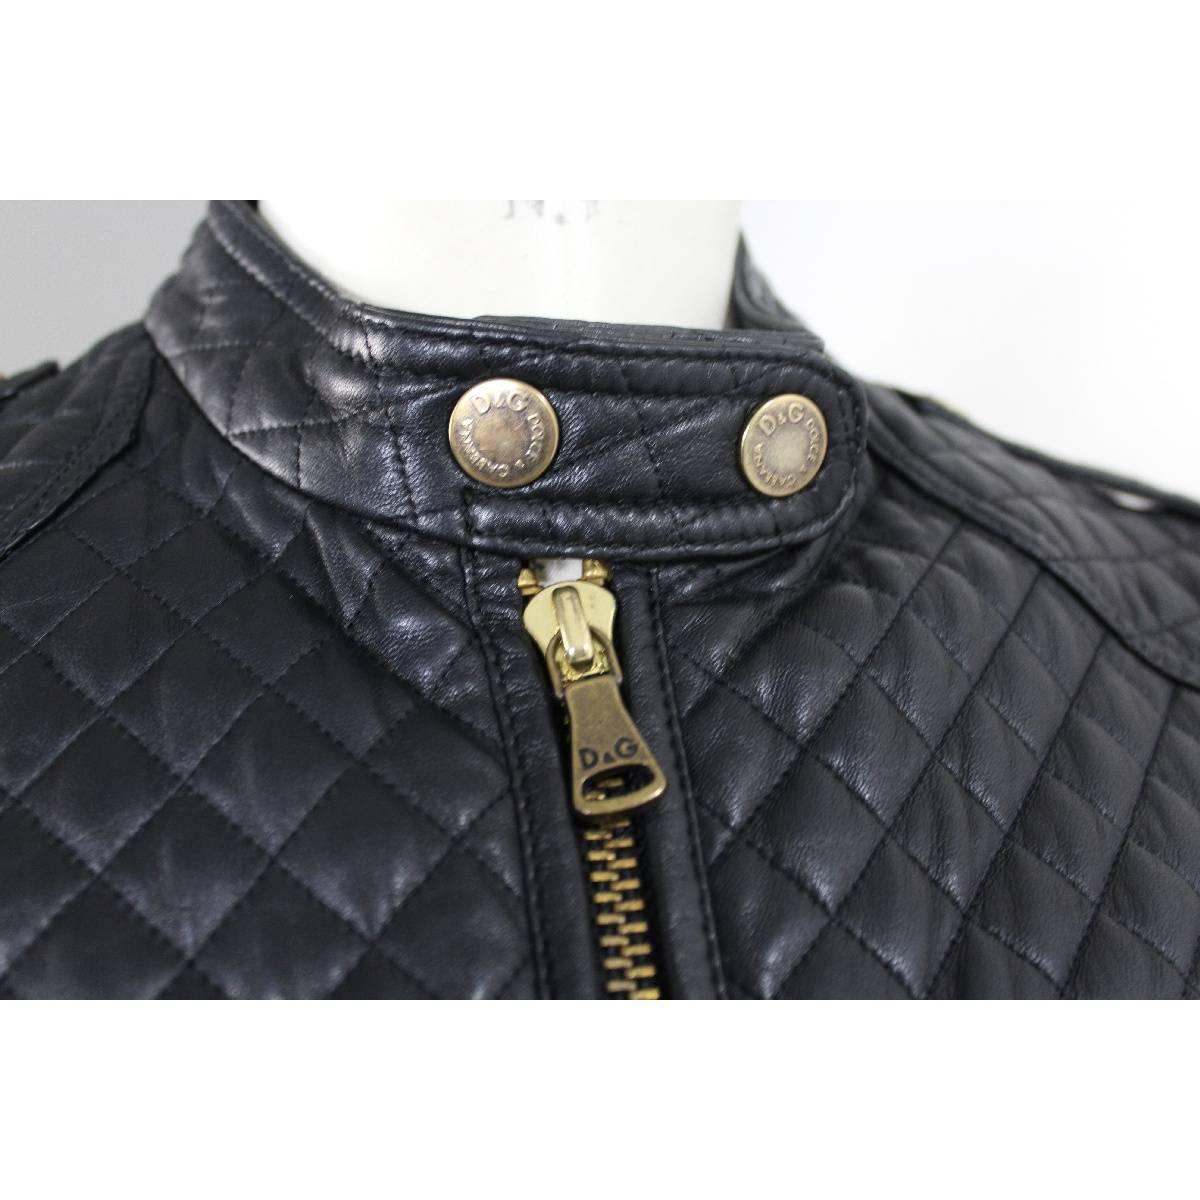 Black Dolce & Gabbana black leather lamb skin quilted jacket motorcycle size 44 it 